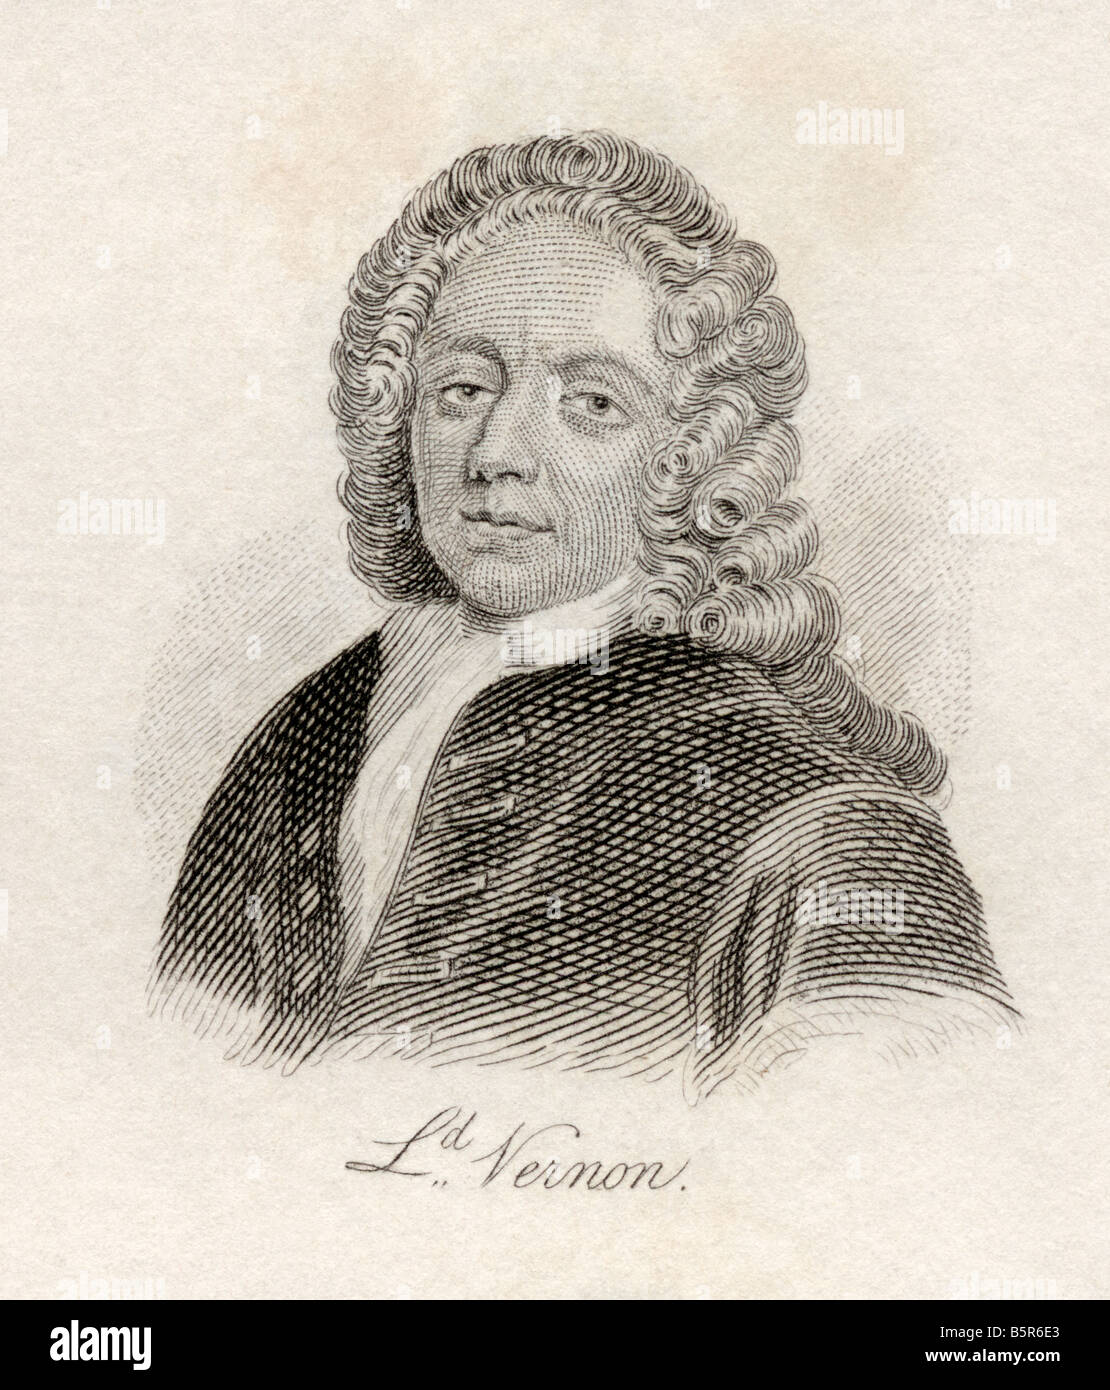 Edward Vernon, 1684 - 1757. English naval officer.  From the book Crabb's Historical Dictionary, published 1825. Stock Photo